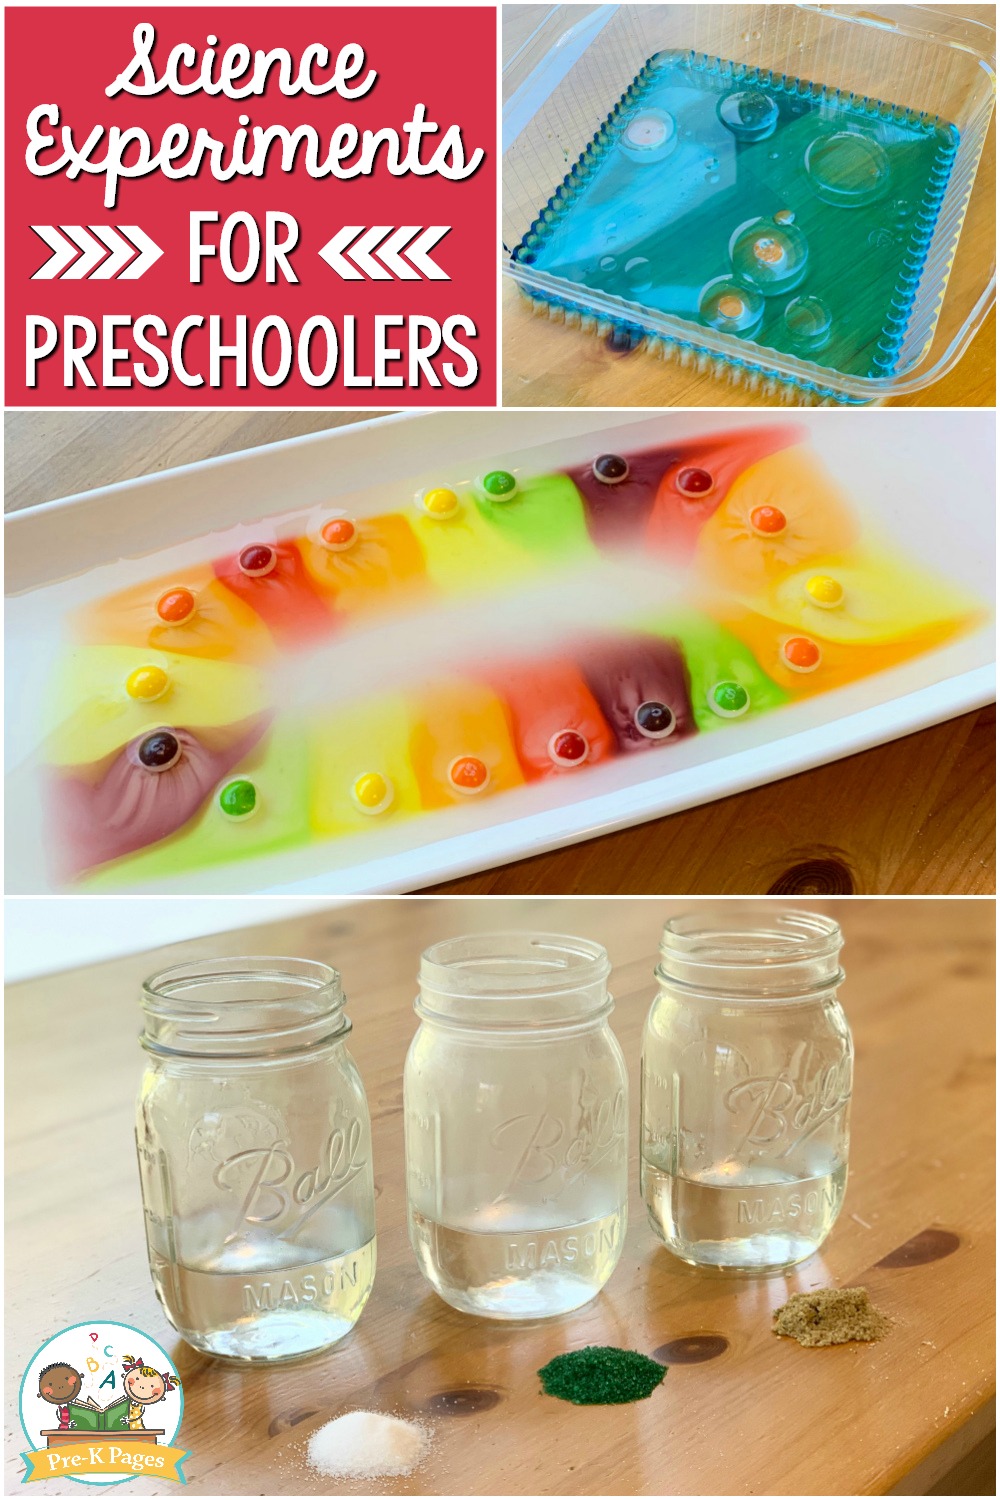 Easy Science Experiments for Class or Home - Pre-K Pages